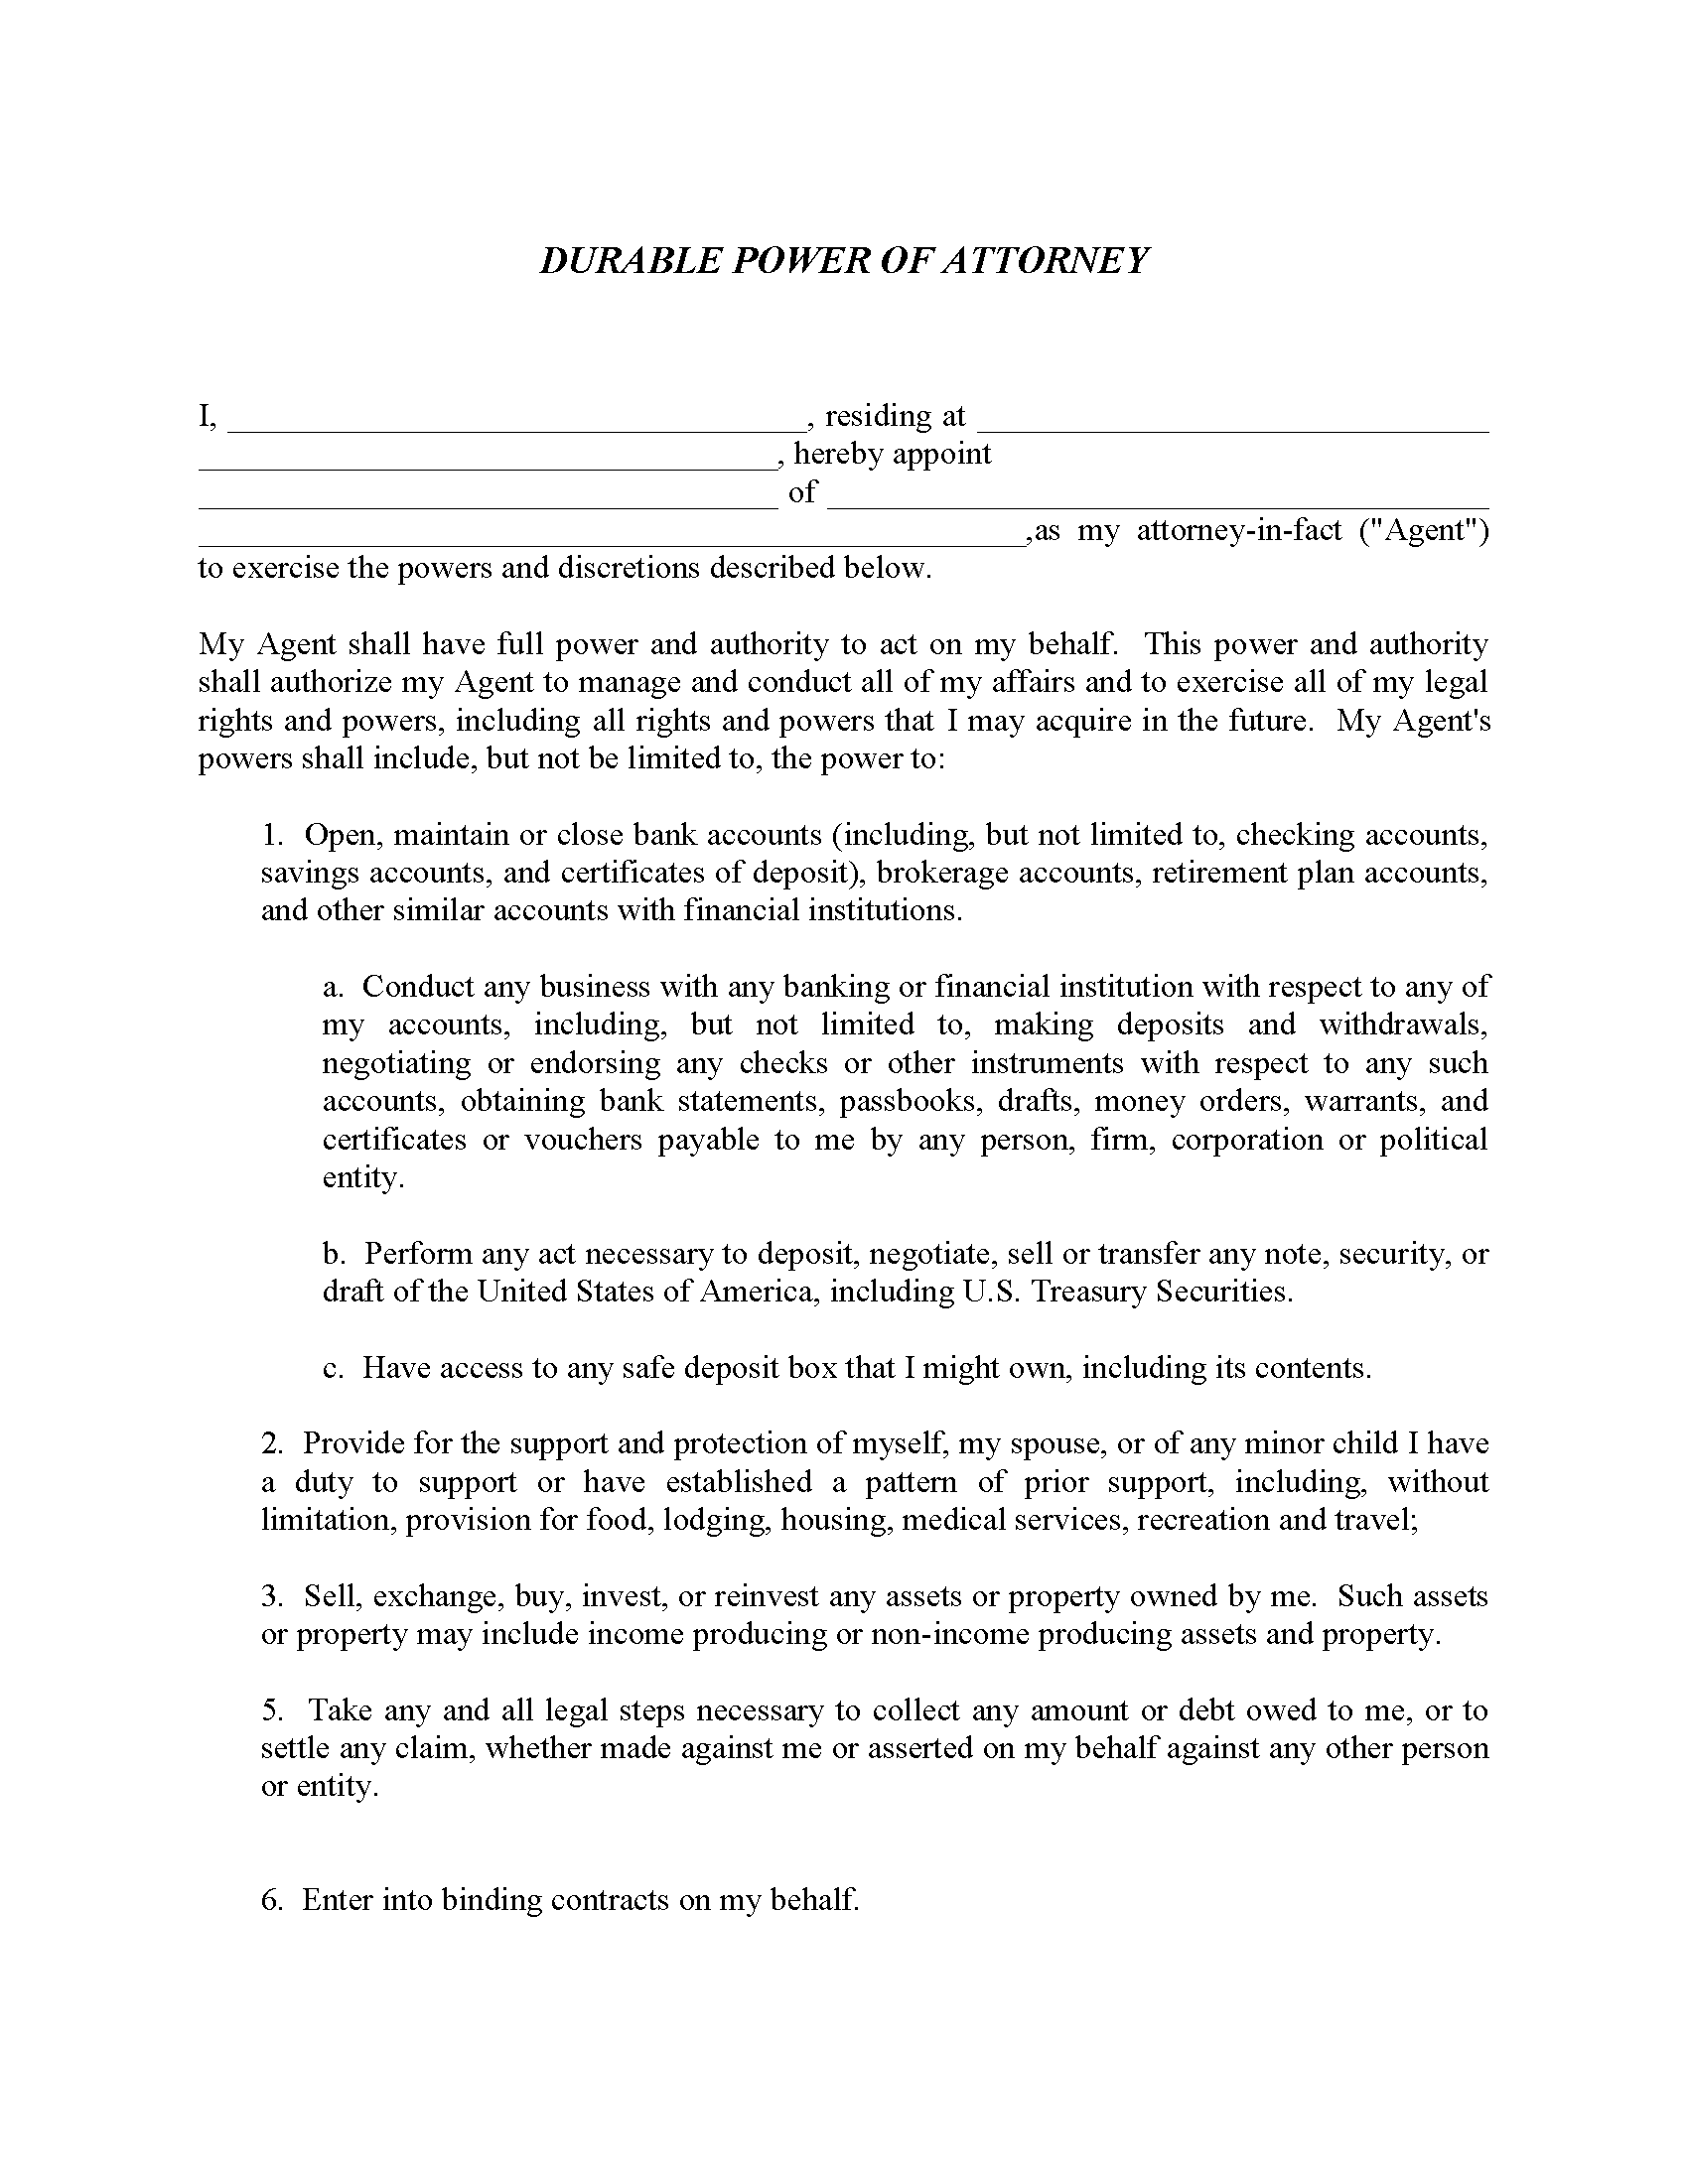 Enduring Power of Attorney - Fillable PDF - Free Printable Legal Forms